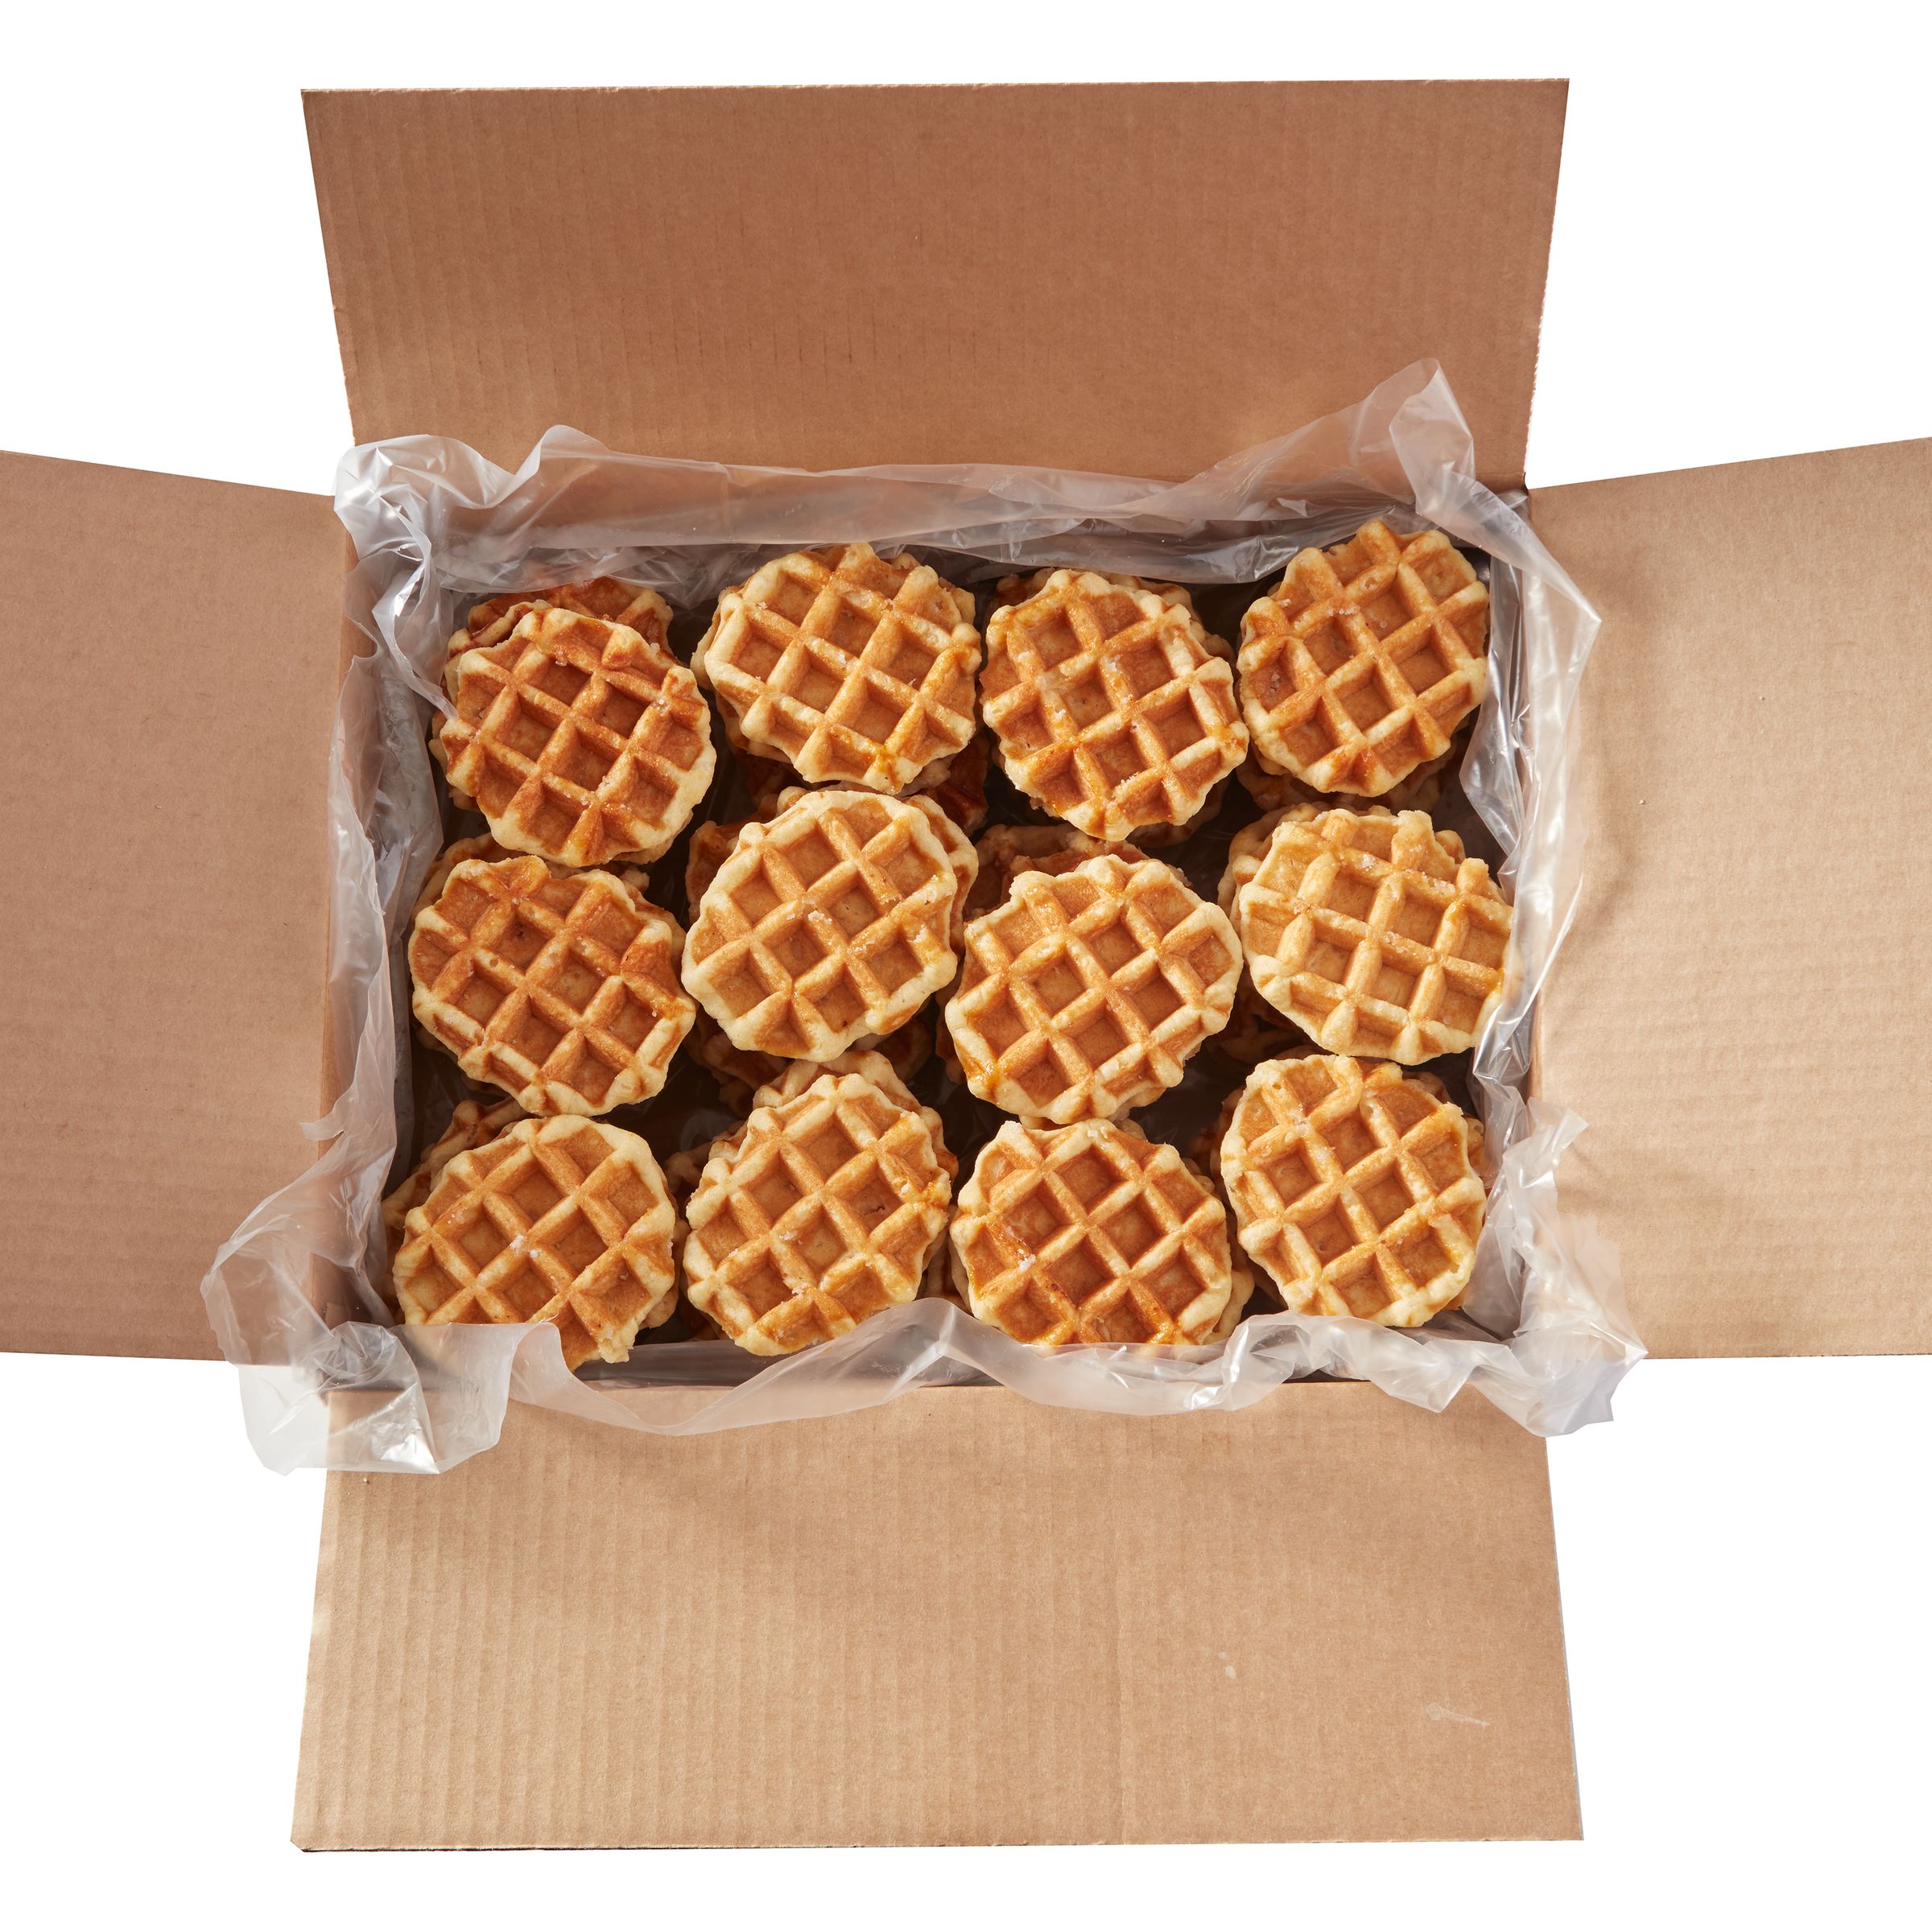 Pillsbury Belgian Style Waffle Carrier from General Mills